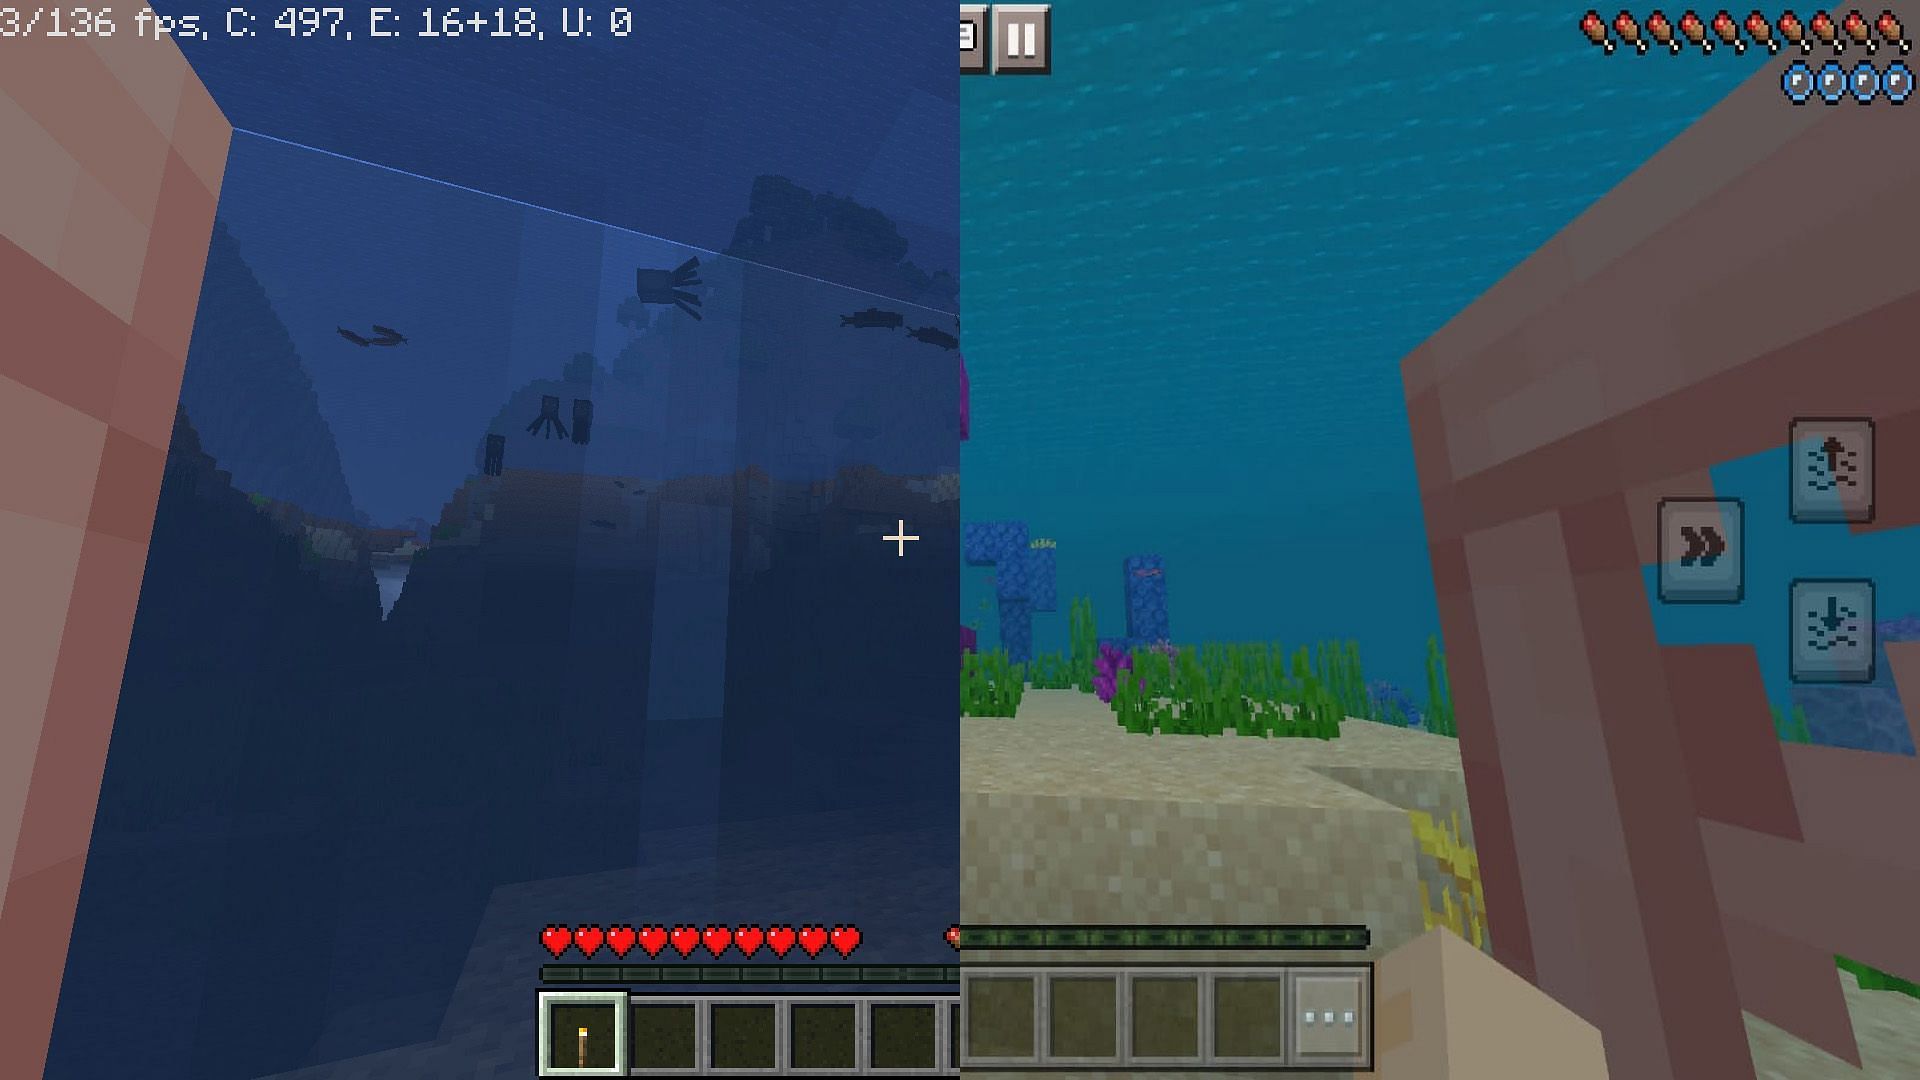 Difference Between Minecraft Java and Bedrock Edition